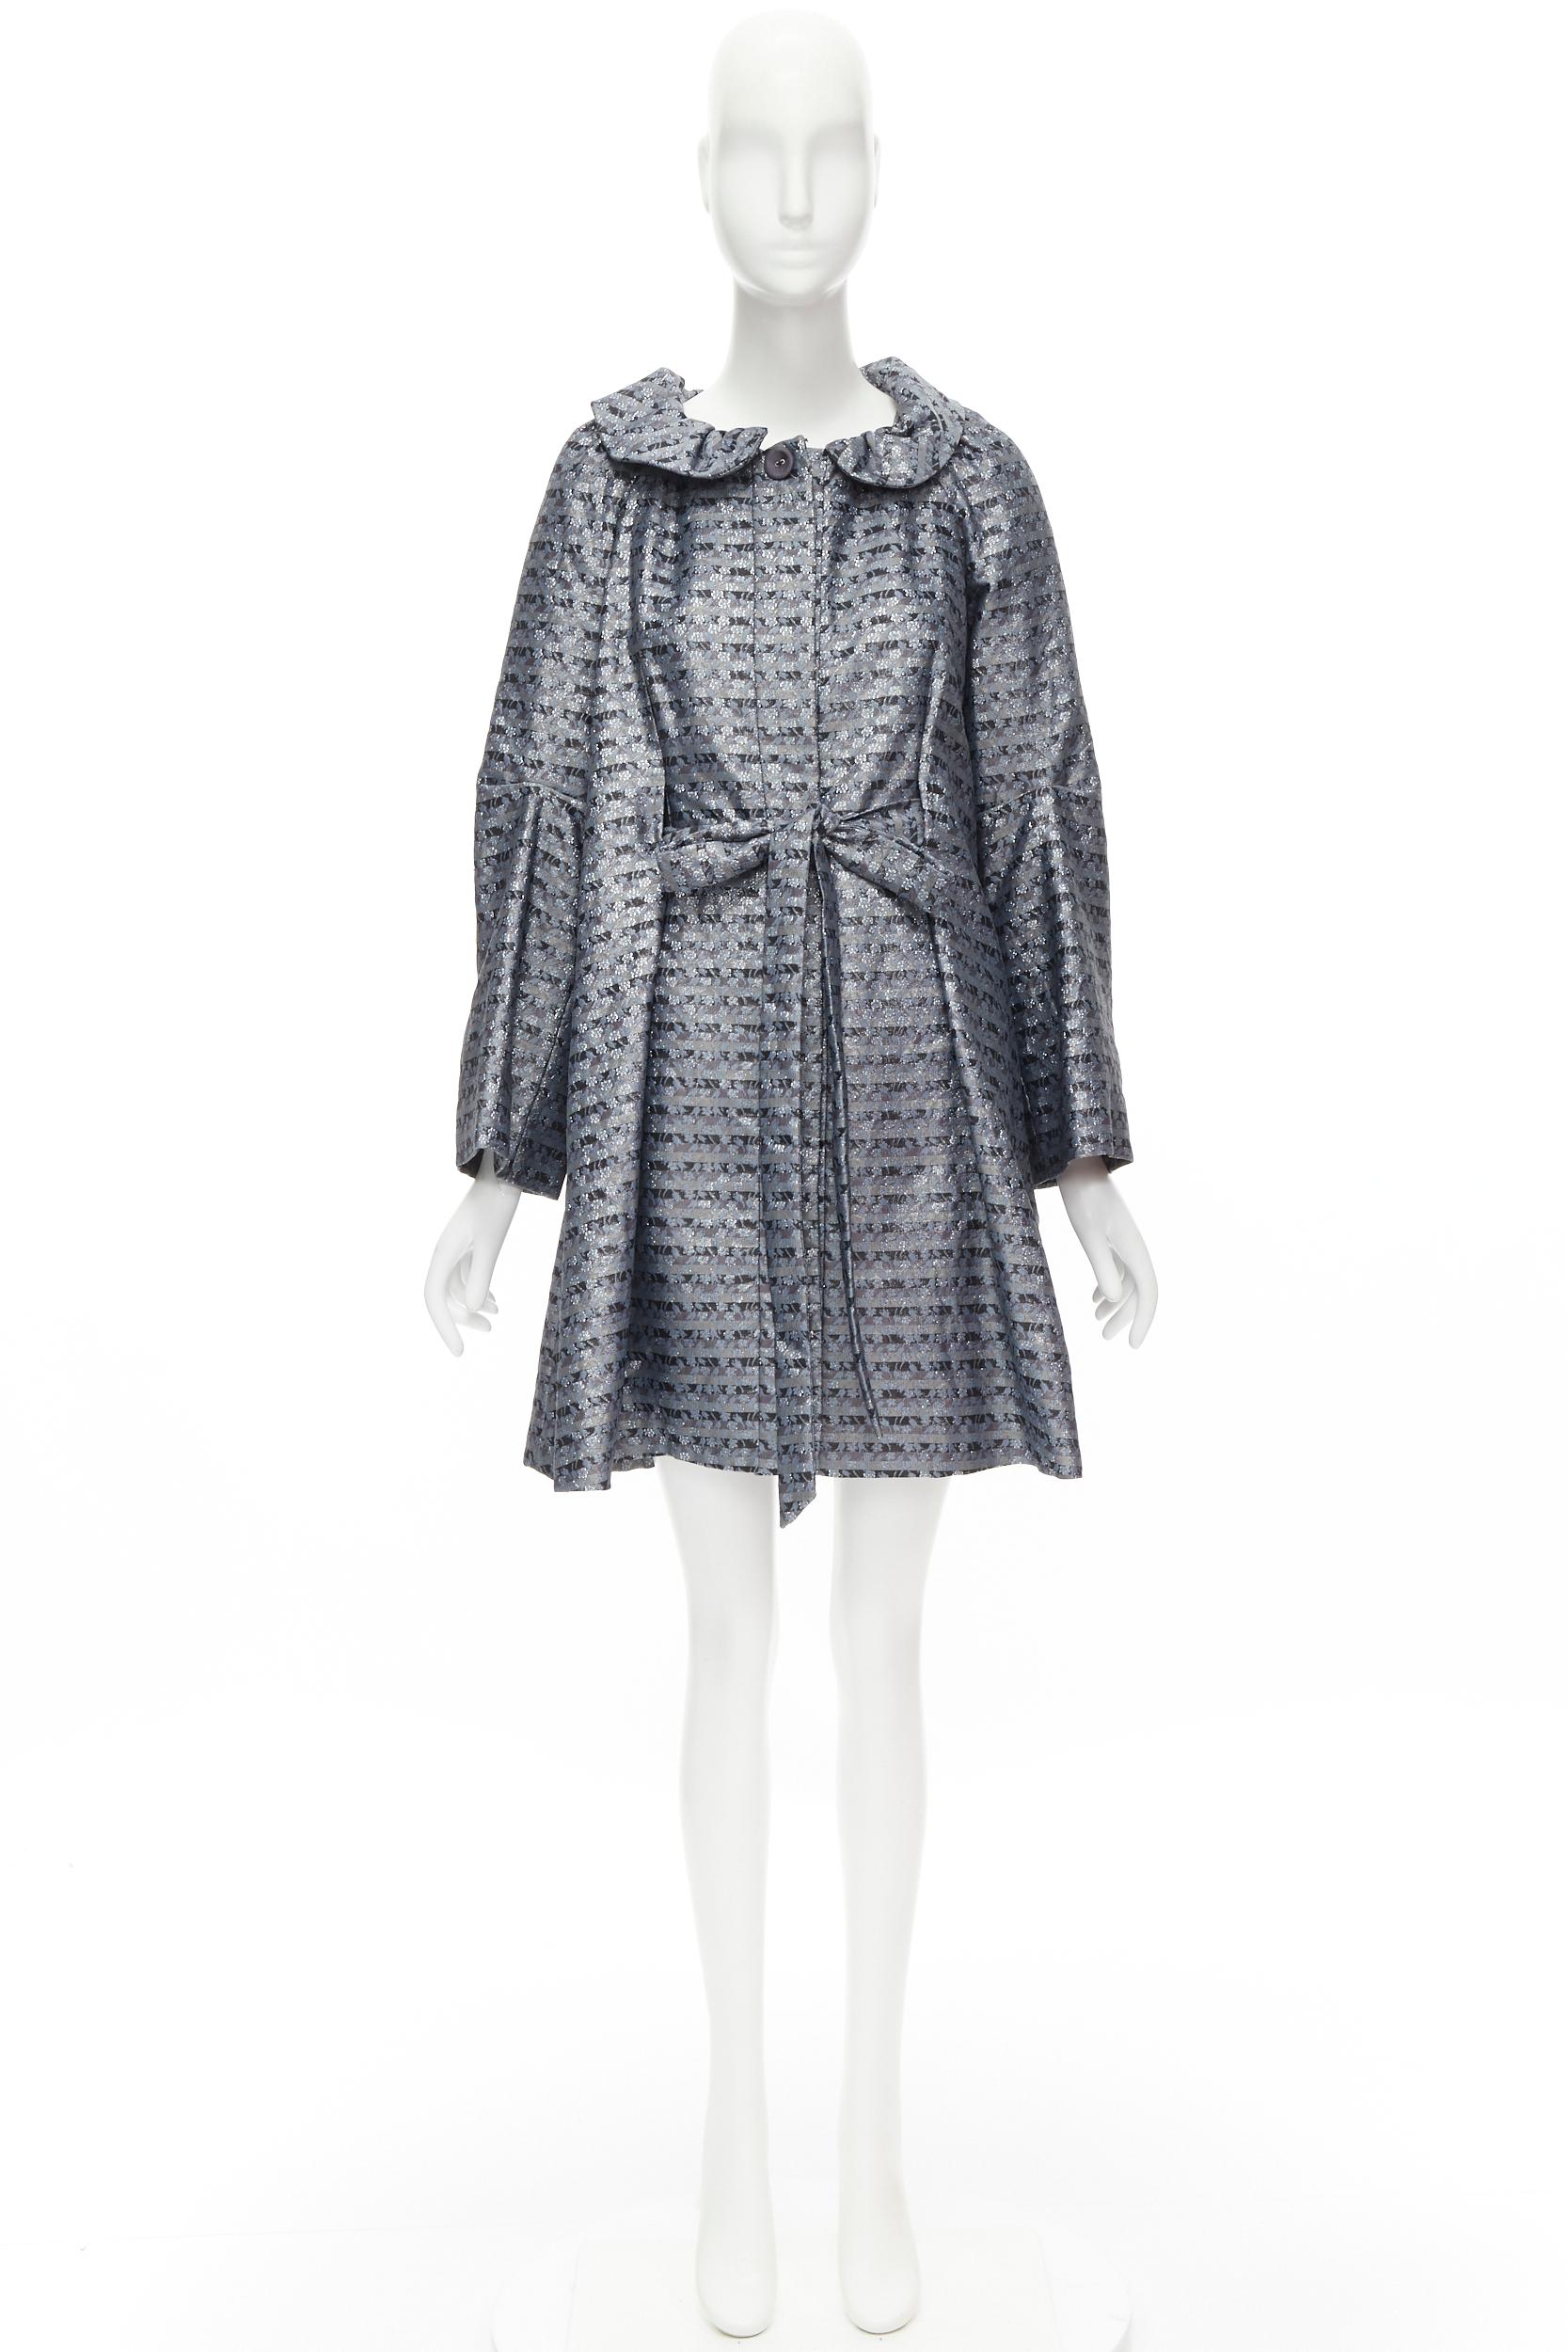 MARC JACOBS metallic blue floral jacquard belted front flared opera coat XS For Sale 7